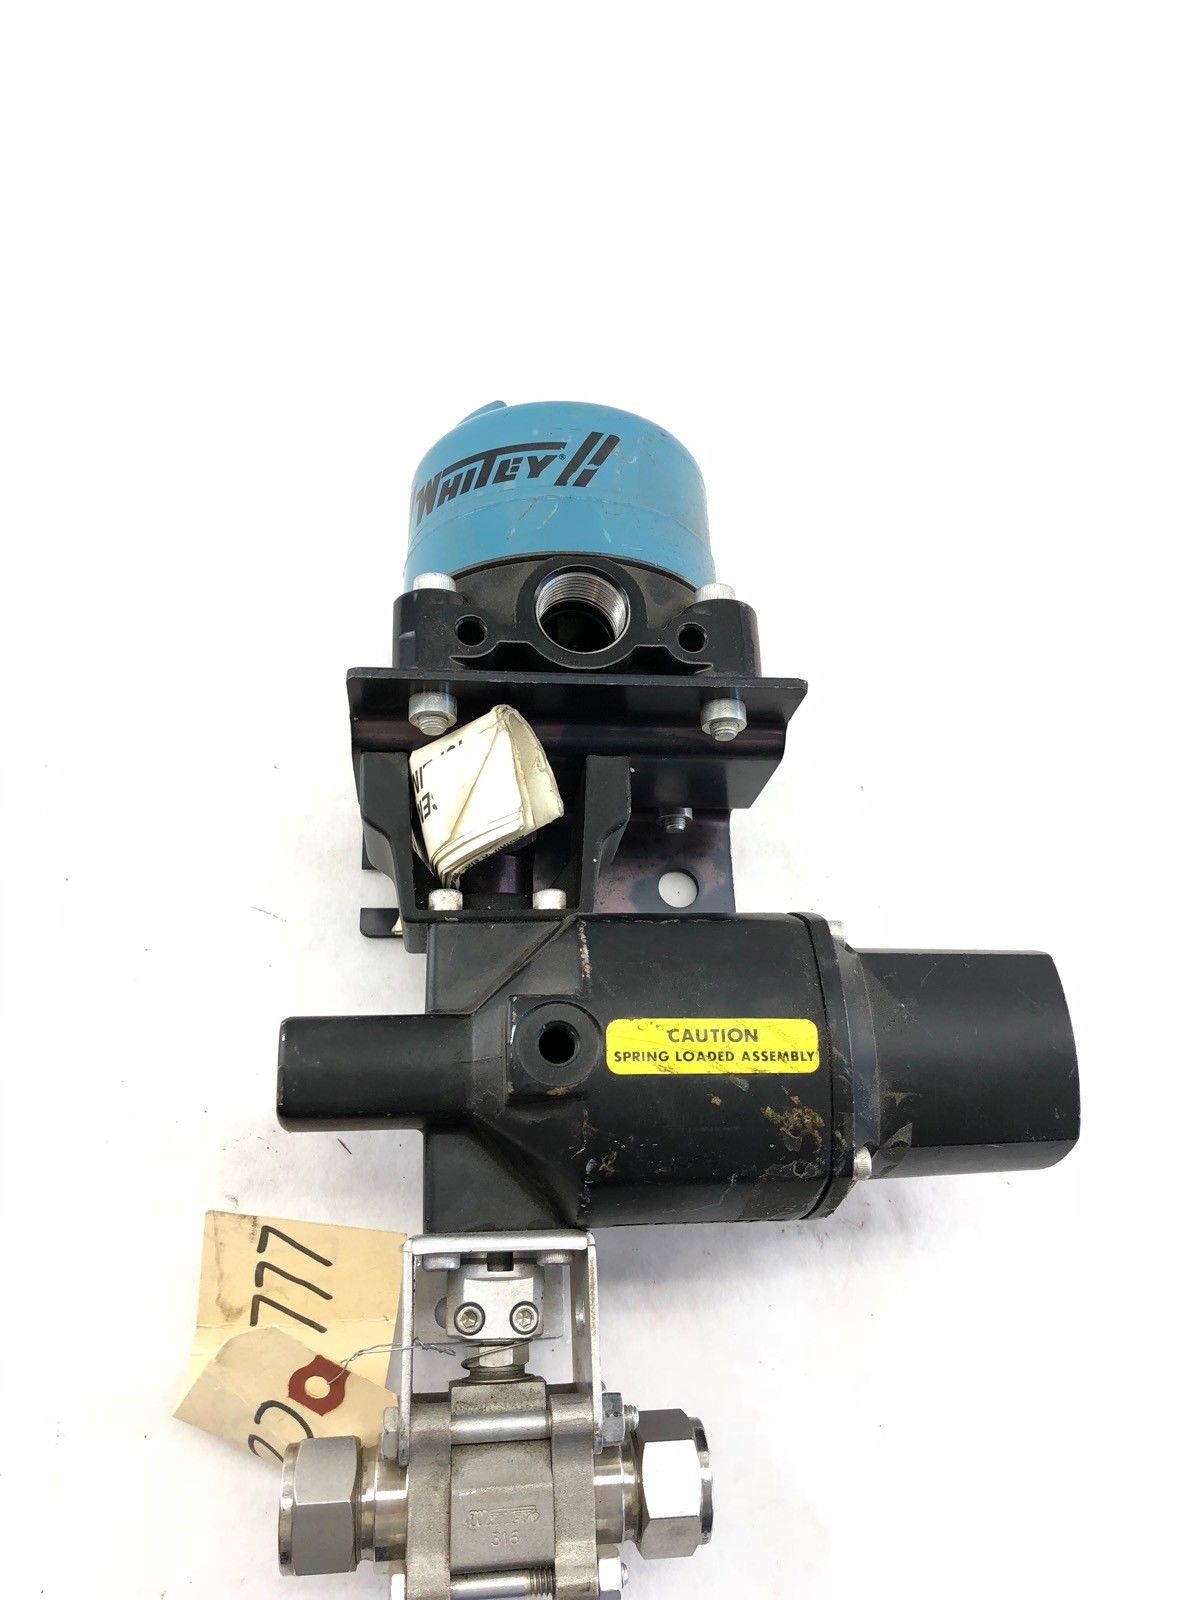 USED WHITEY 133-SR PNEUMATIC VALVE ACTUATOR 200 PSI W/ MICRO SWITCH SNAP SWITCH 1